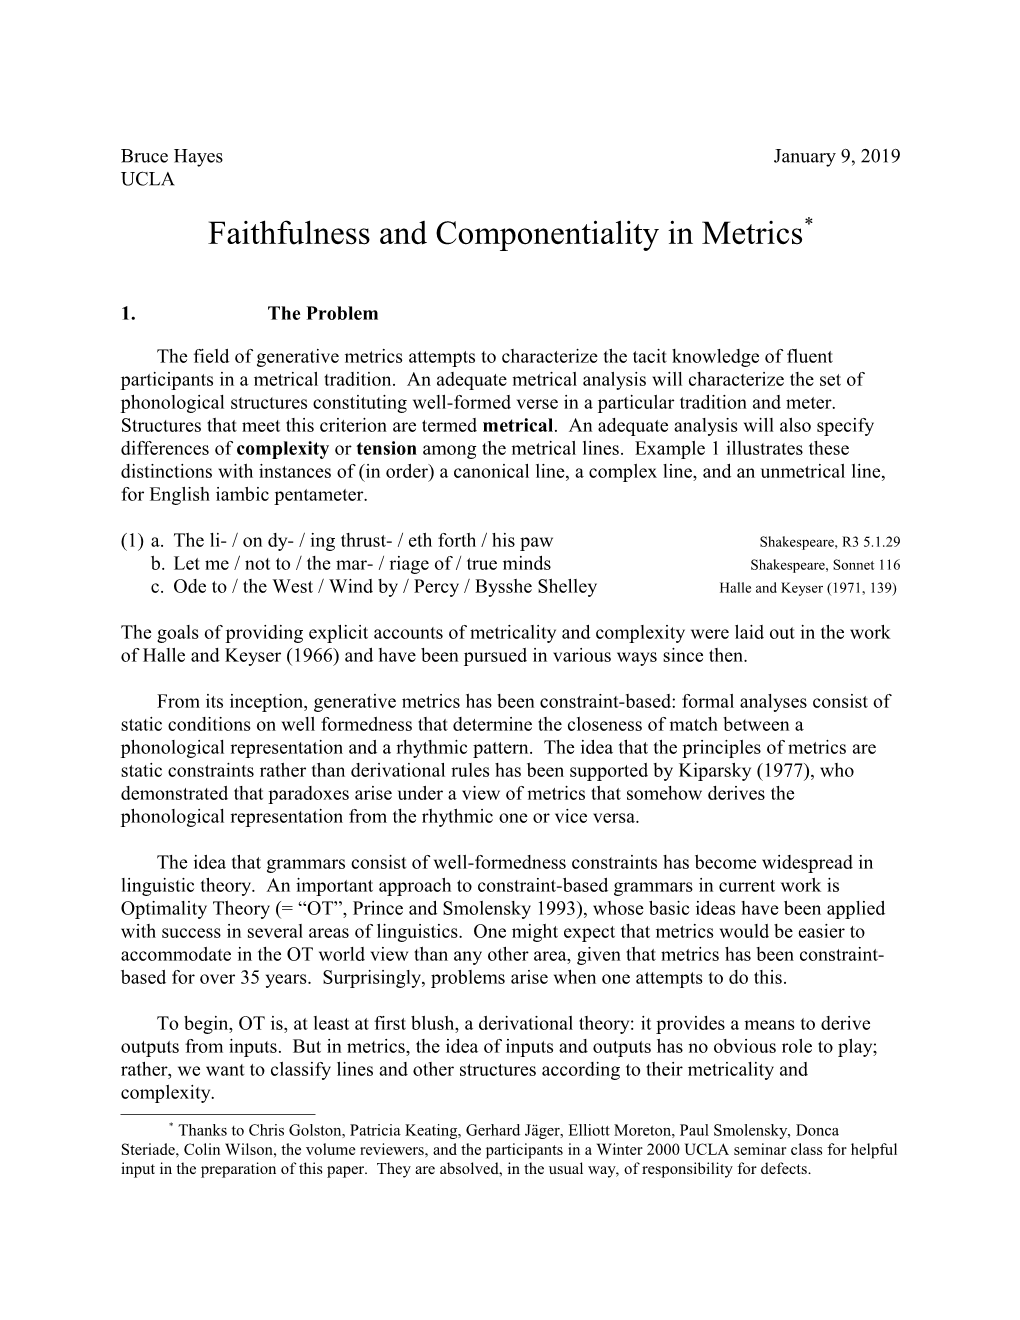 Bruce Hayesfaithfulness and Componentiality in Metricsp. 1